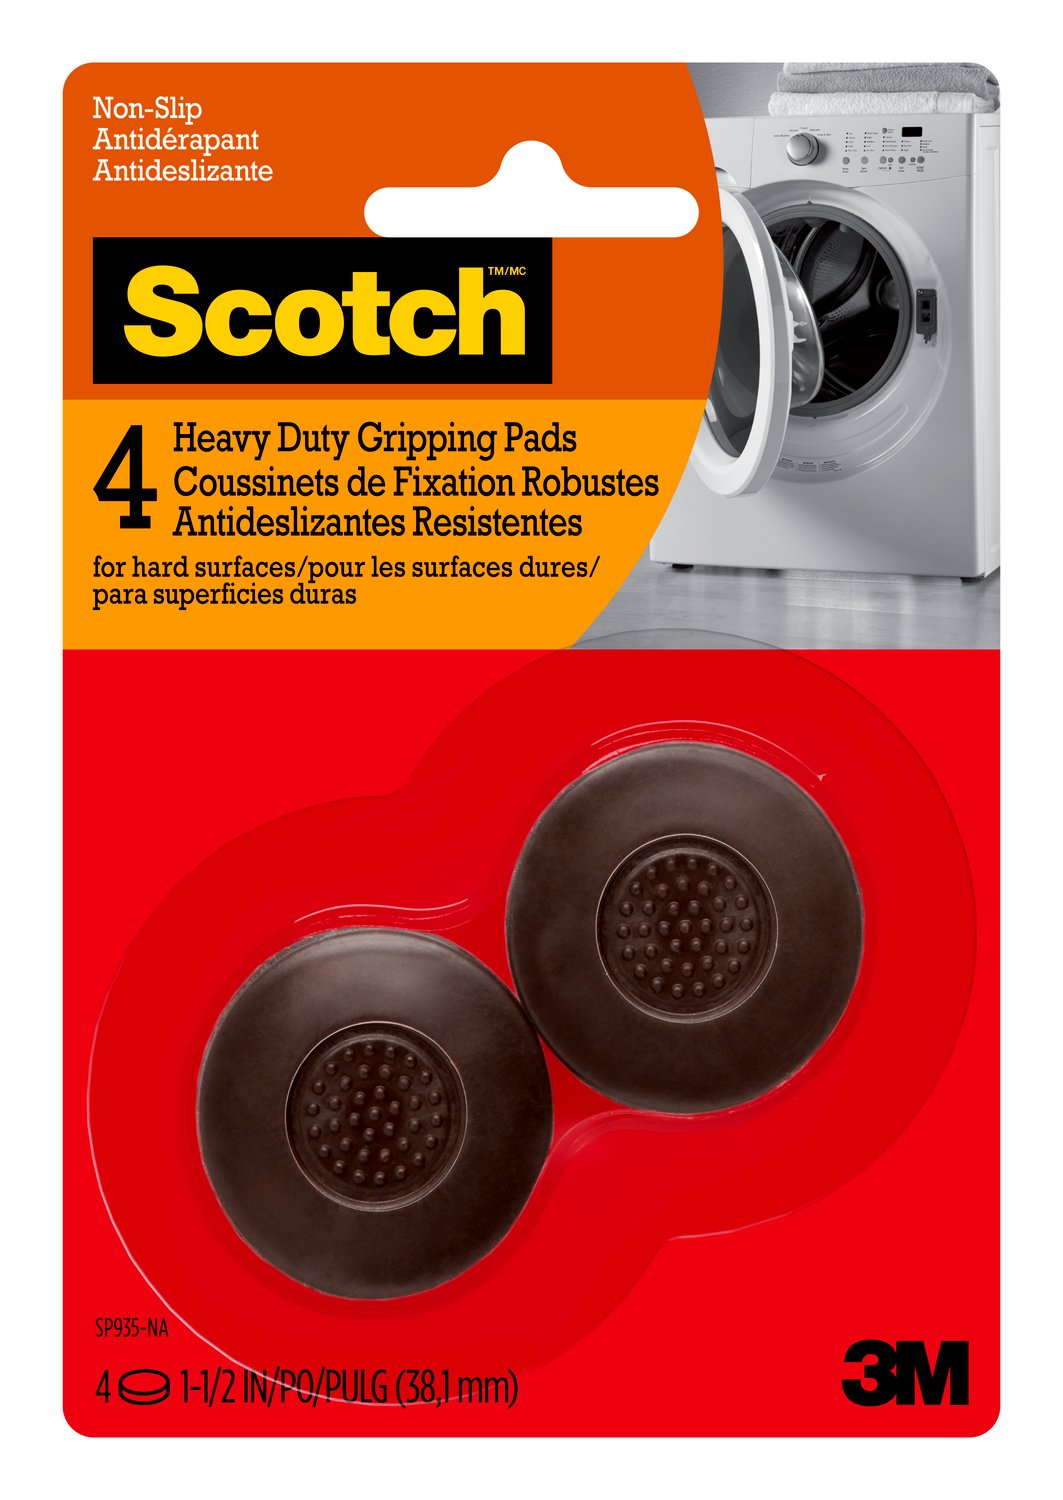 7100202434 - Scotch Gripping Pads SP935-NA, Round, 1.5-in 4/pk